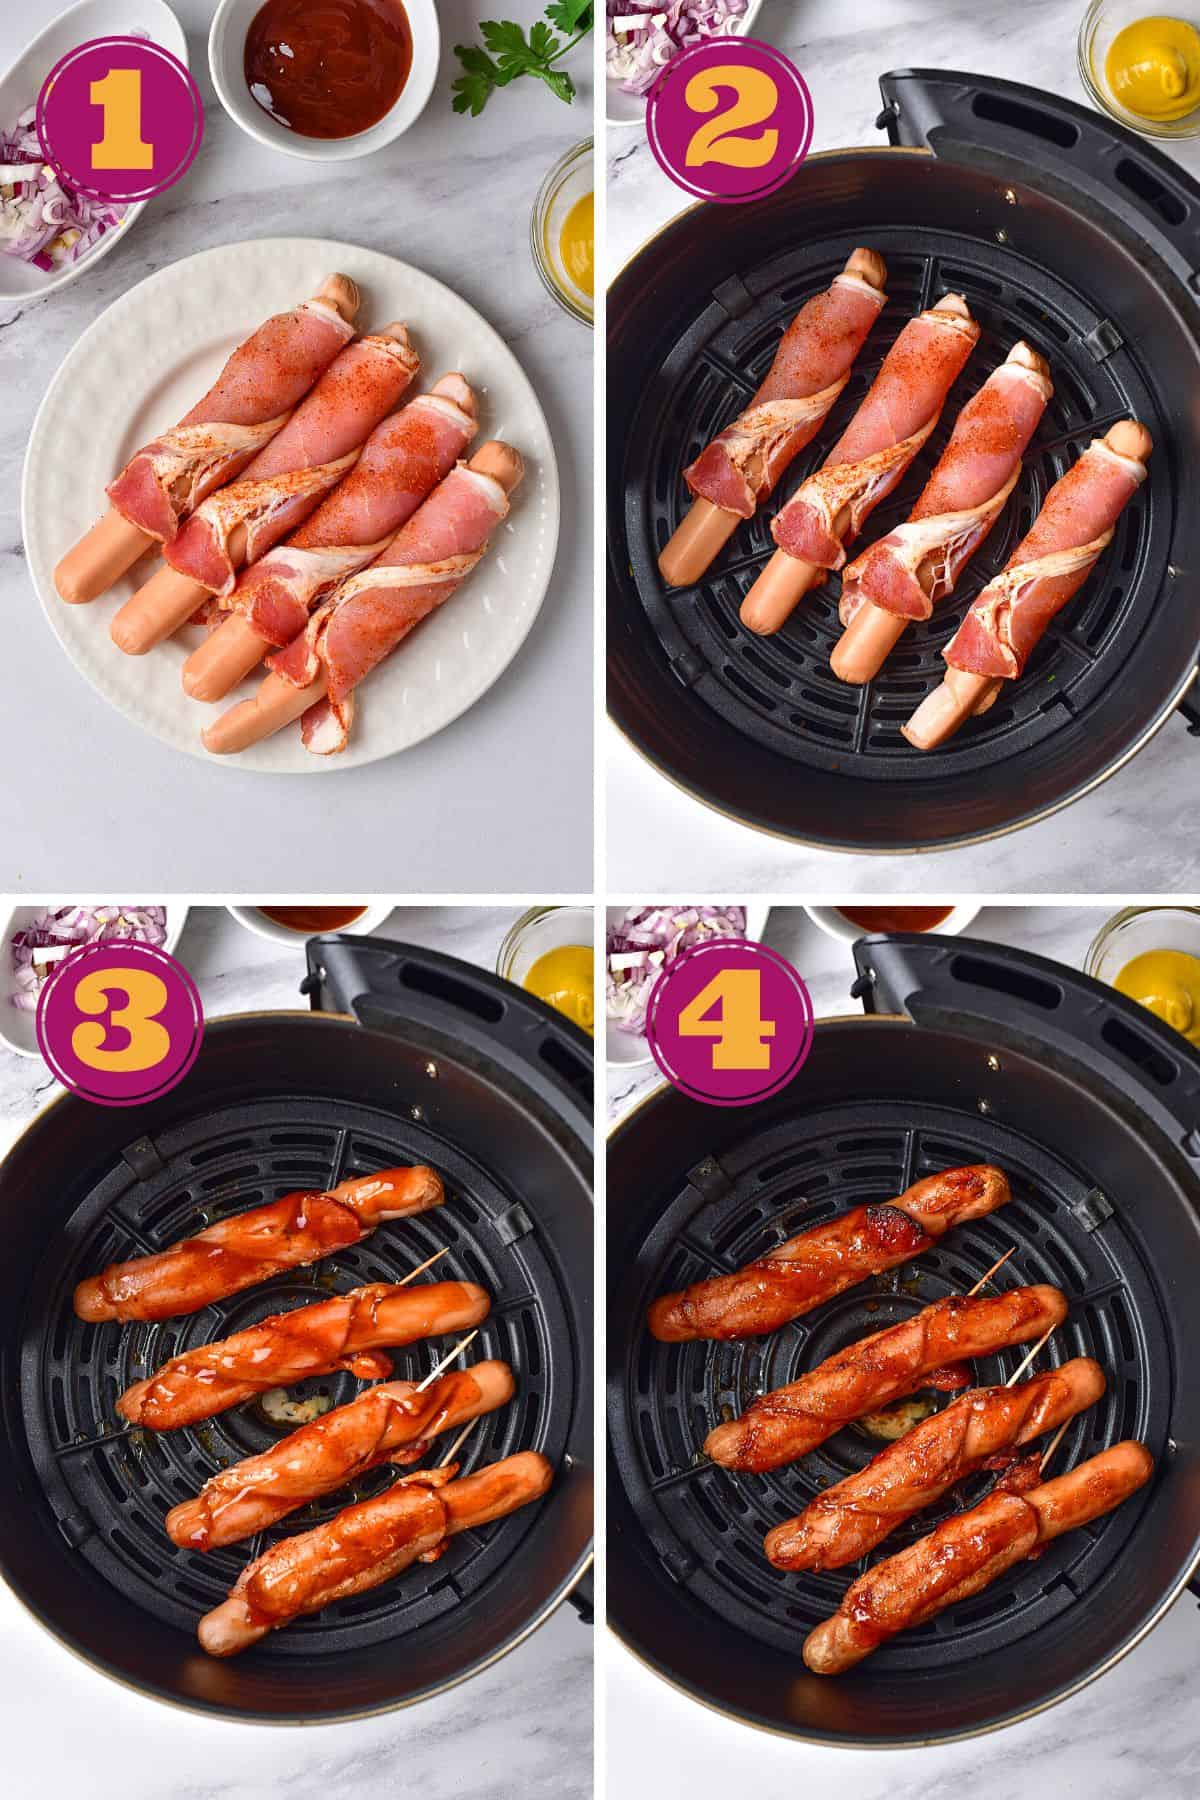 step-by-step instruction for how to make Bacon Wrapped Hot Dogs in an air fryer